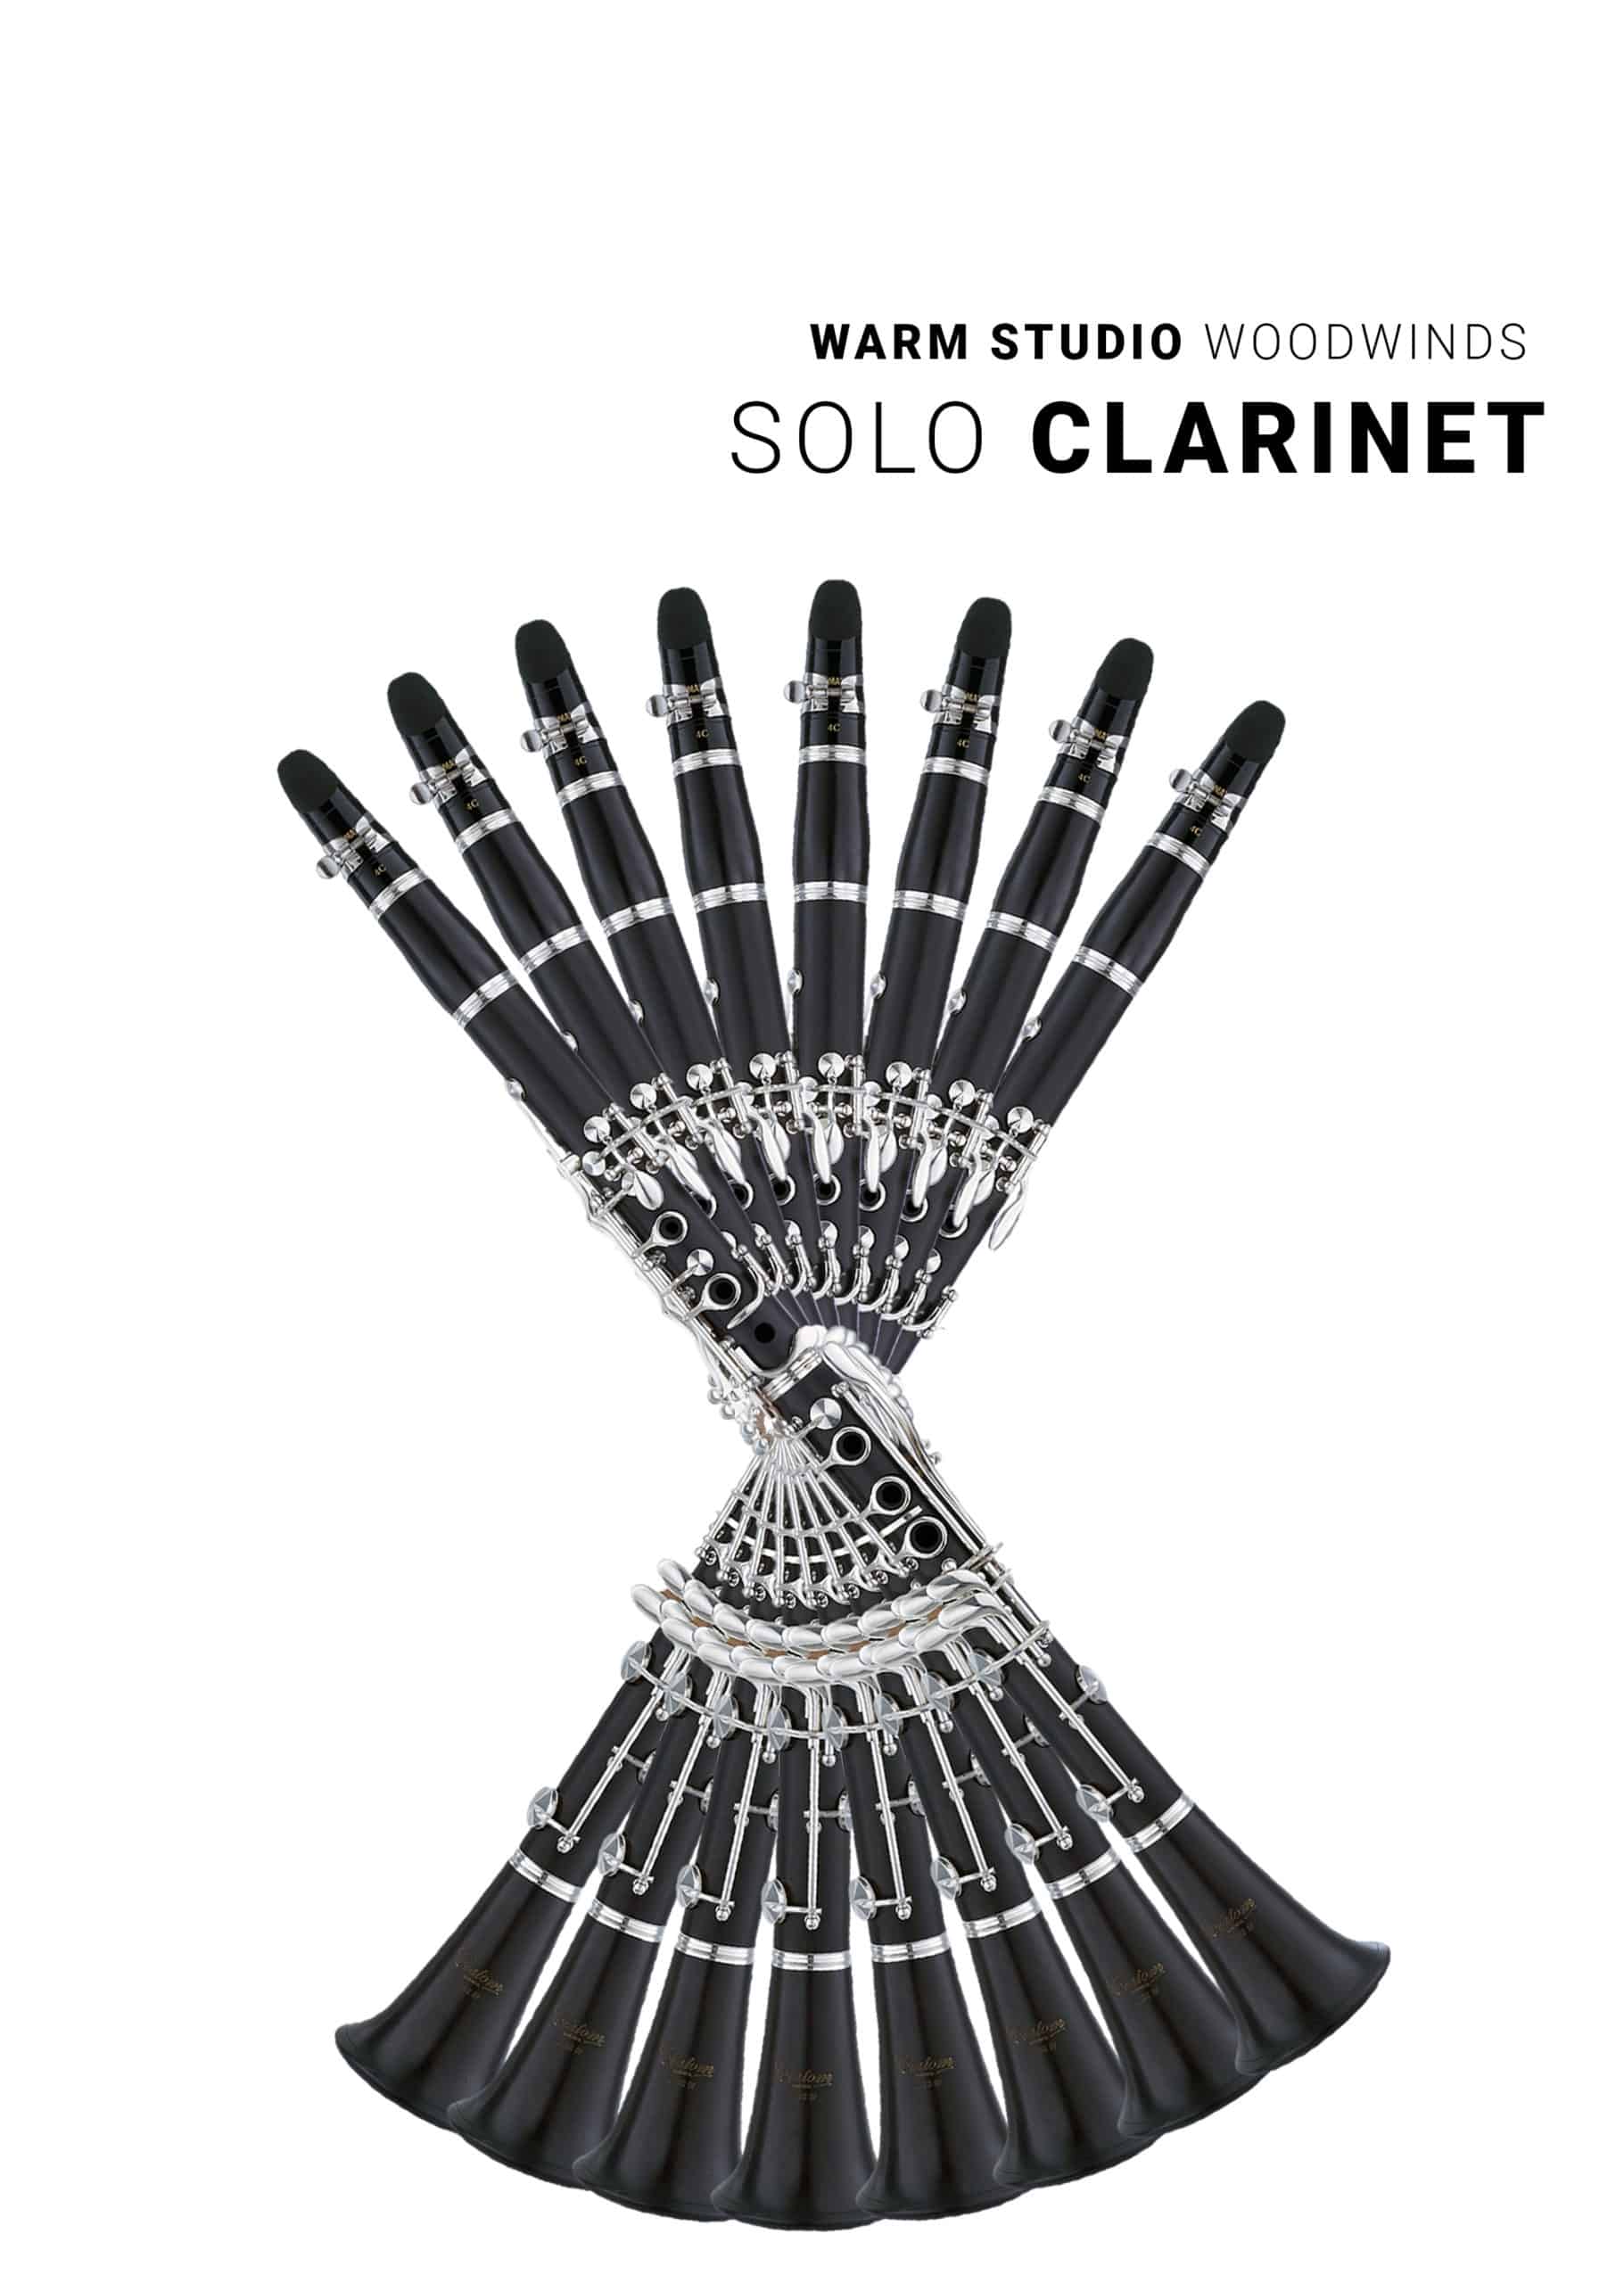 Solo Clarinet – Warm Studio Woodwinds – The Next Evolution of 8Dio’s Woodwind Ensembles​